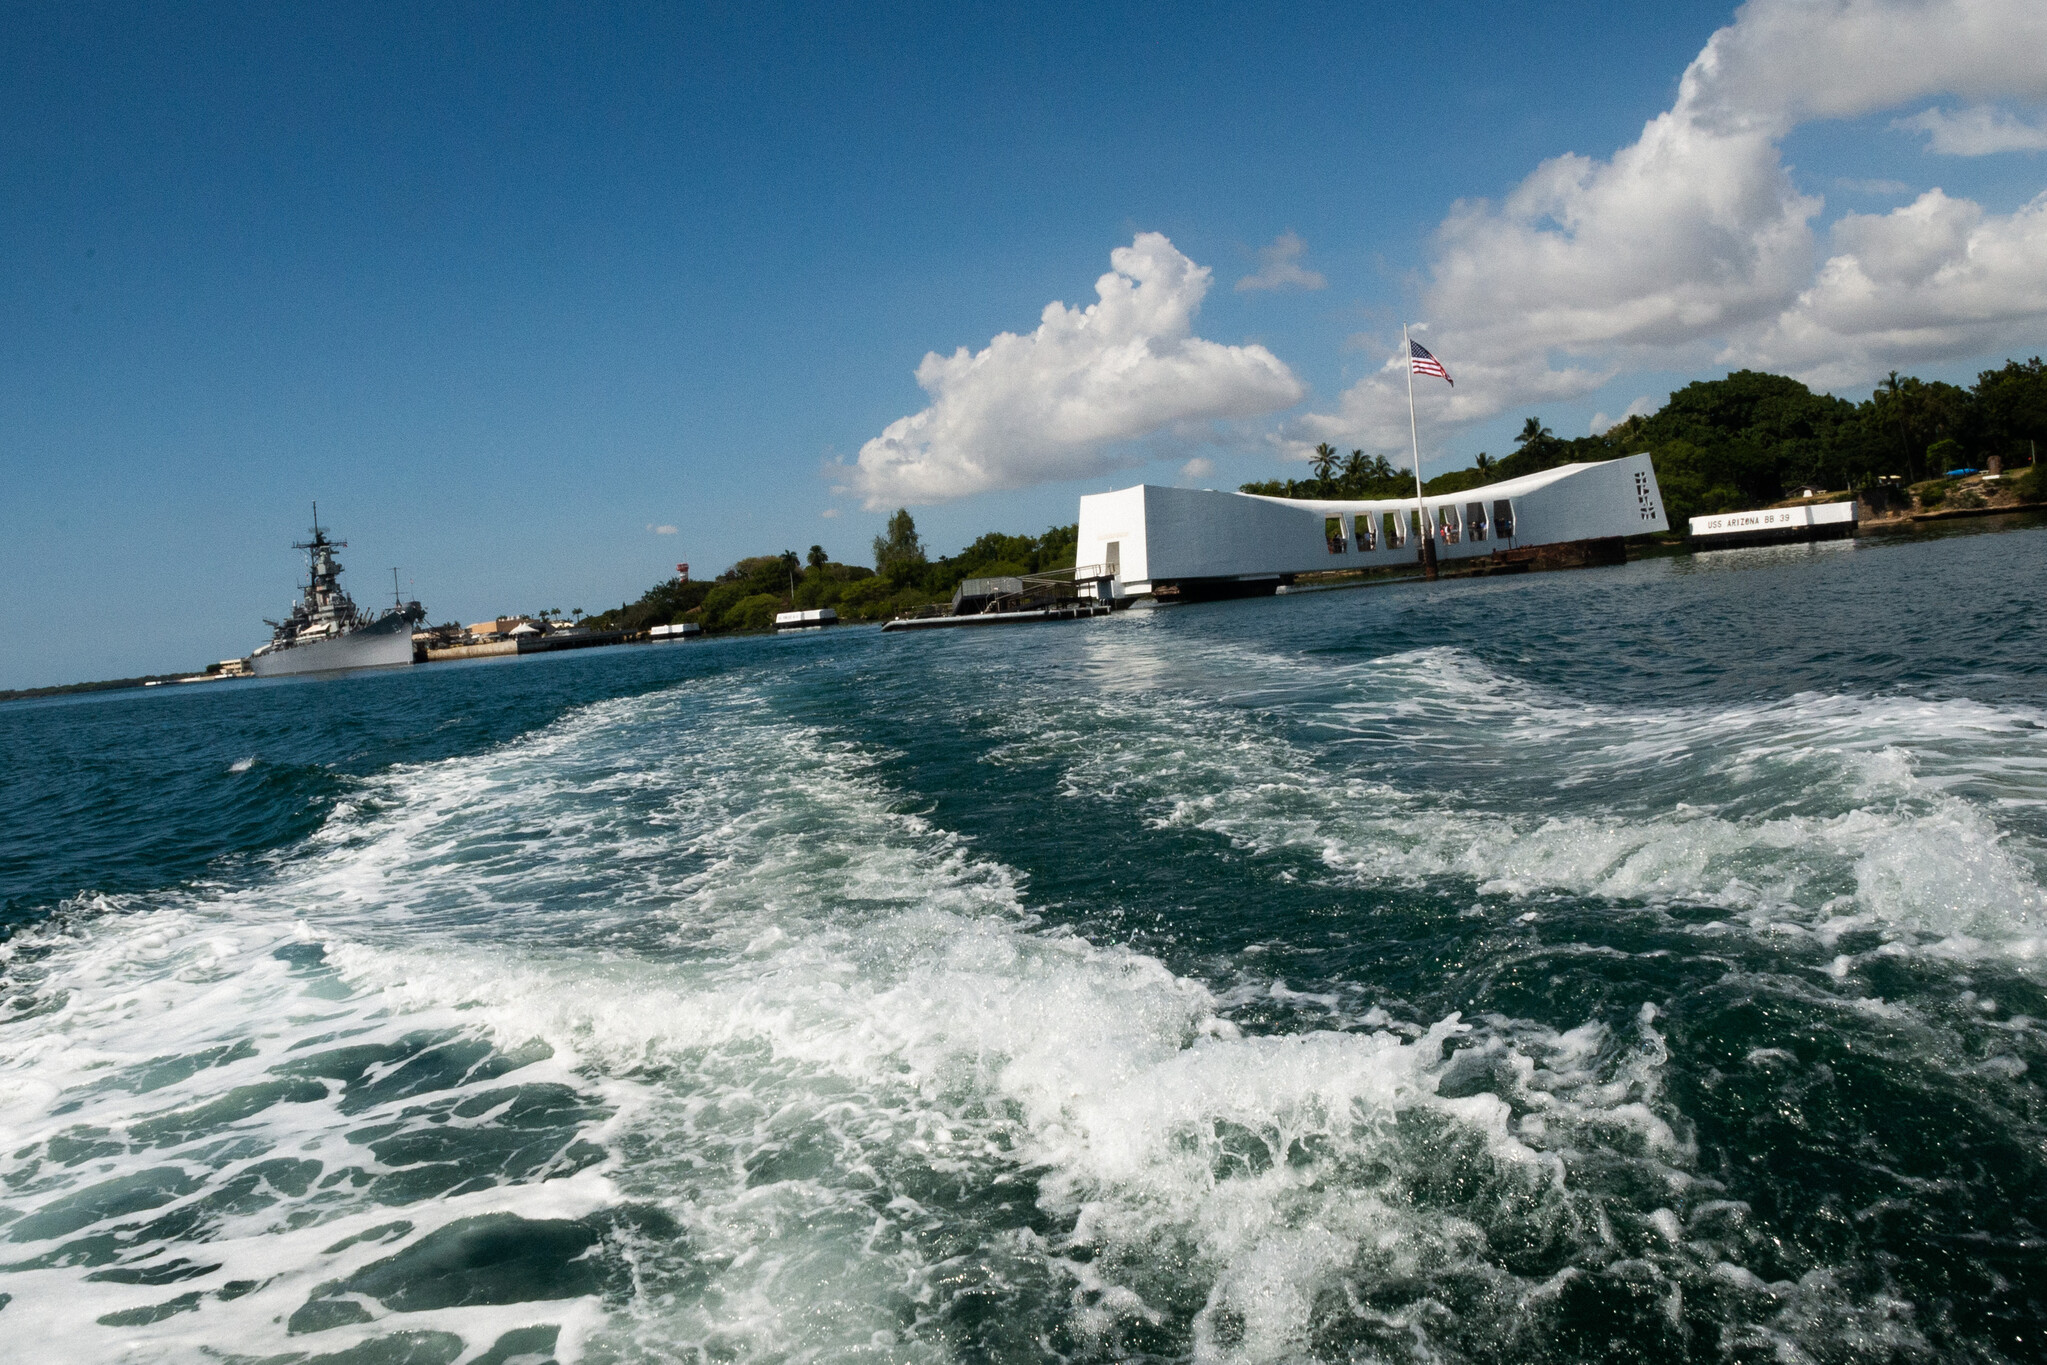 IDEM Photo Gallery[シリウス]Yasuo Otsuji Photo Exhibition “Pearl Harbor -War Ruins Beyond the Sea-” Period: December 15 (Thursday) to December 21 (Wednesday), 2022 | Press release of Aidem Co., Ltd.